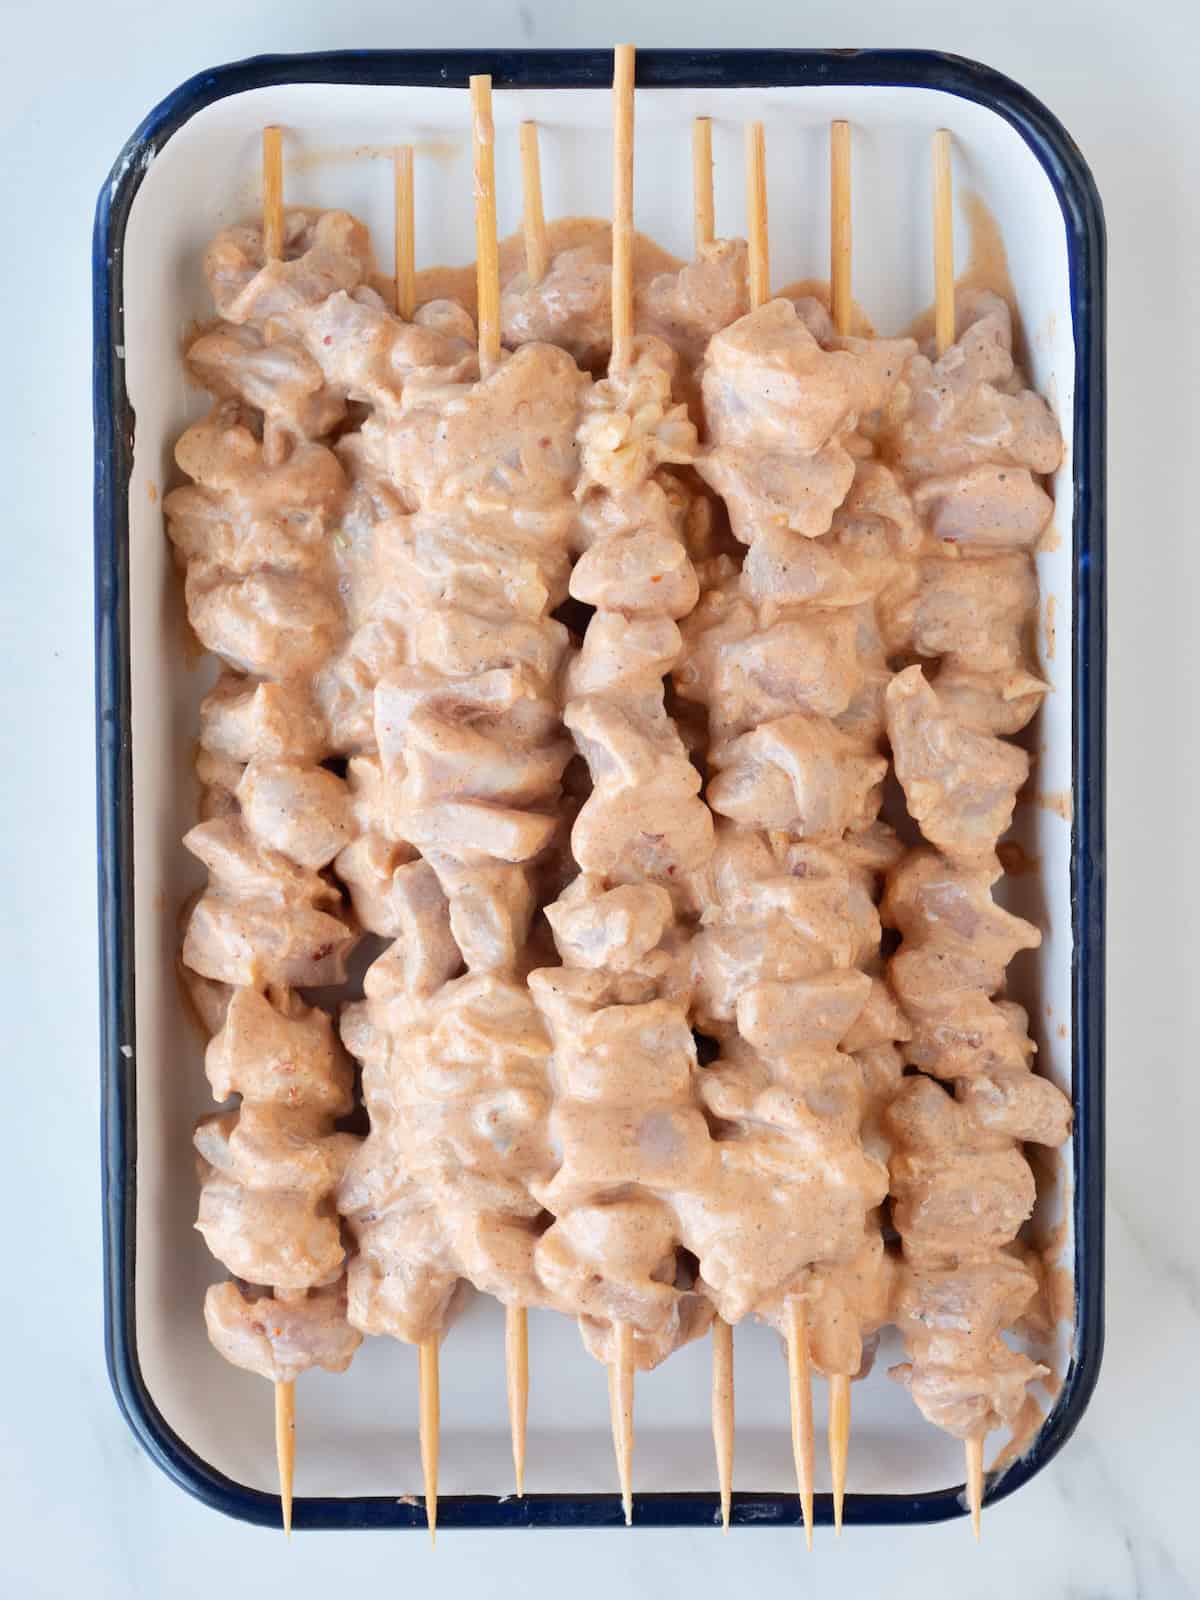 A rectangular dish with wooden skewers with the marinated chicken cubes threaded on them.